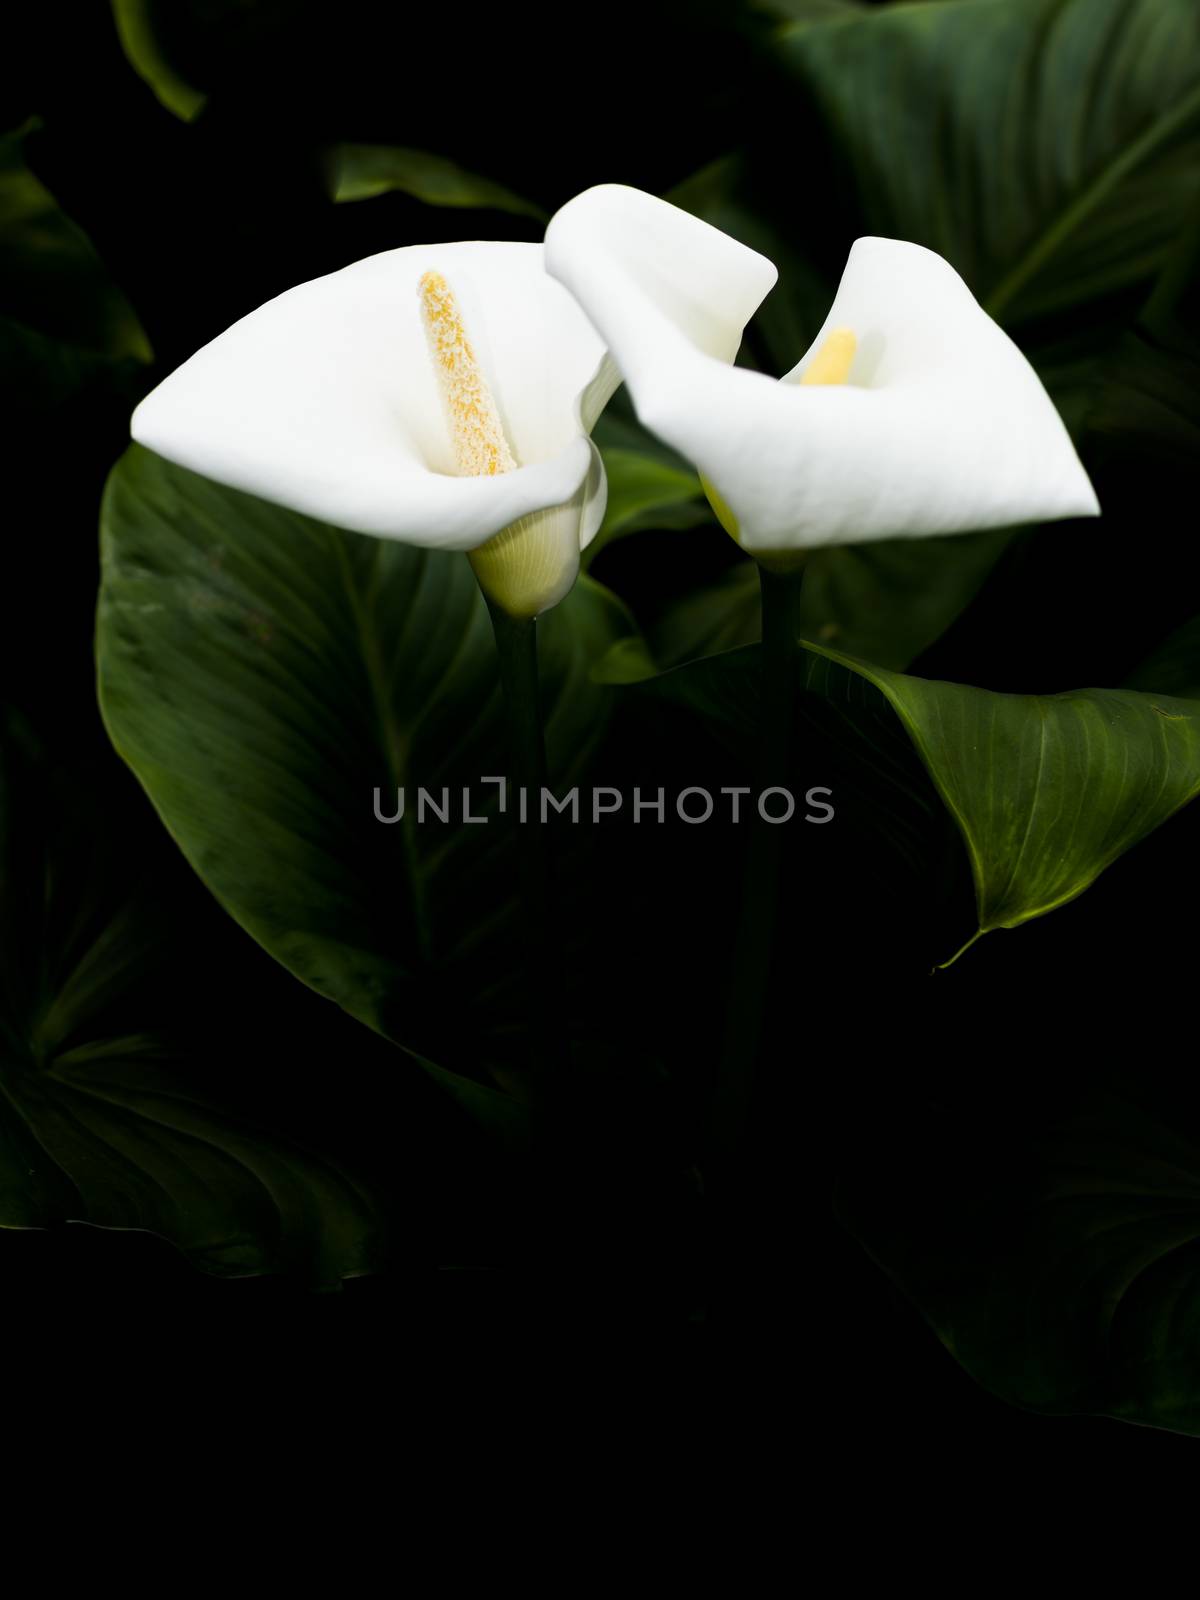 Two callas in dark. Two callas with leaves vertical image and black copy space below.